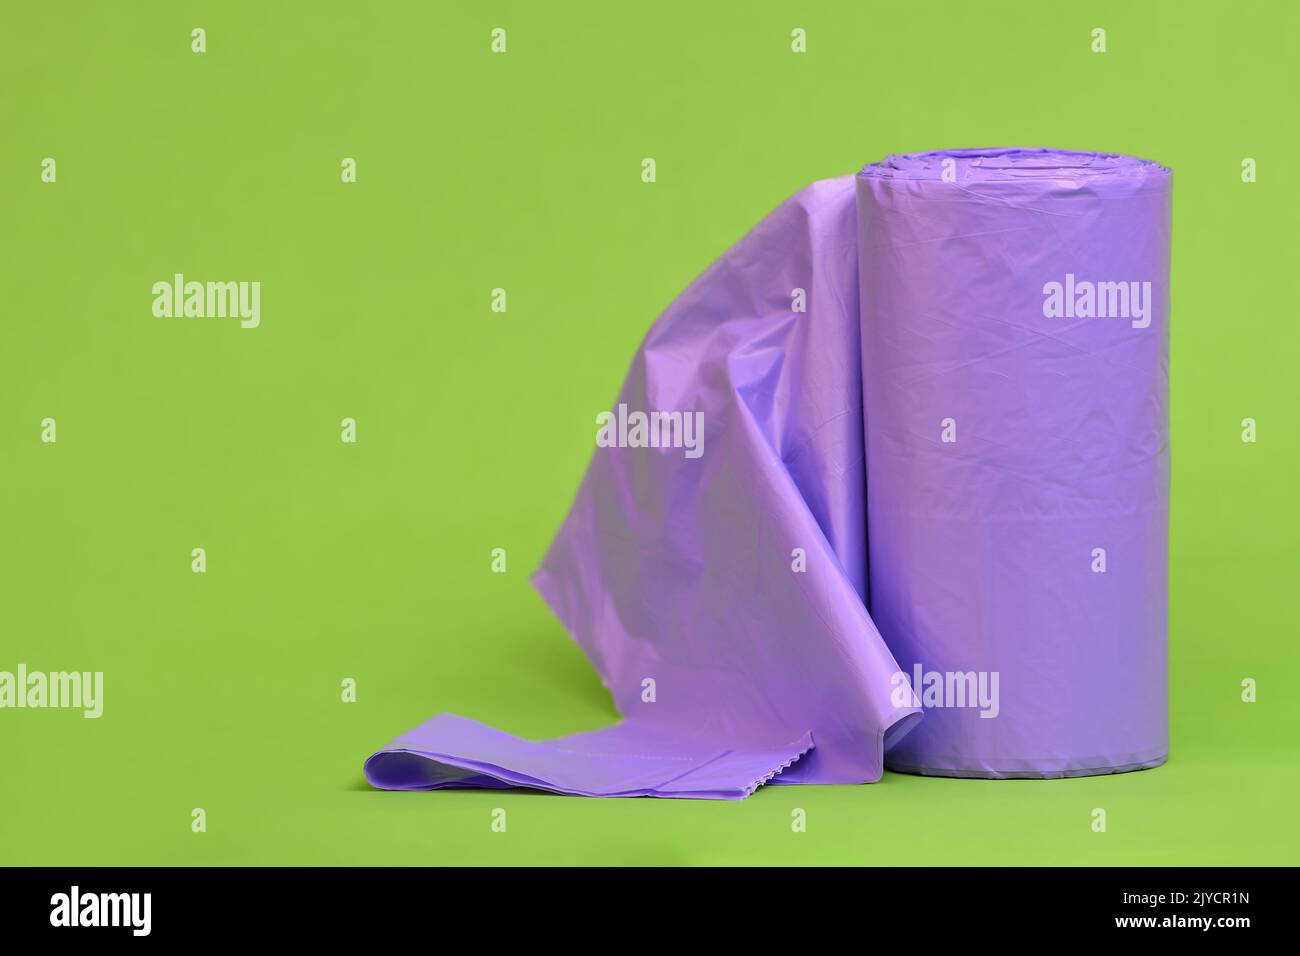 https://c8.alamy.com/comp/2JYCR1N/a-tightly-packed-roll-of-non-recyclable-purple-rubbishgarbagetrash-bag-with-the-first-bag-unfolded-on-a-lime-green-background-2JYCR1N.jpg